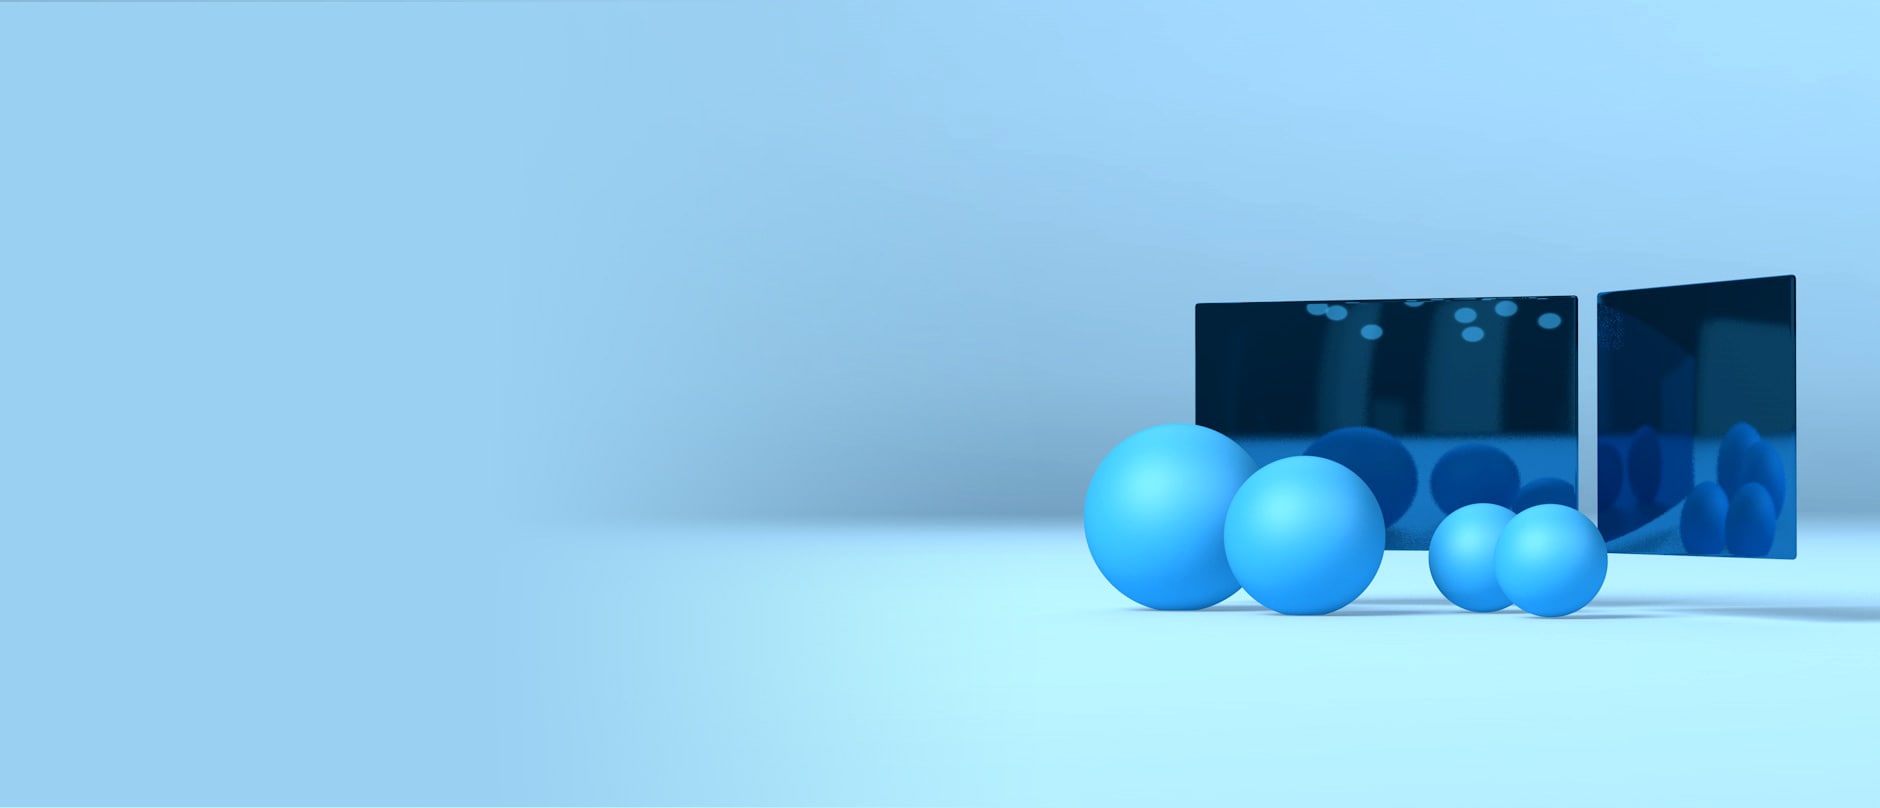 blue spheres in front of 2 reflective screens on a light blue background